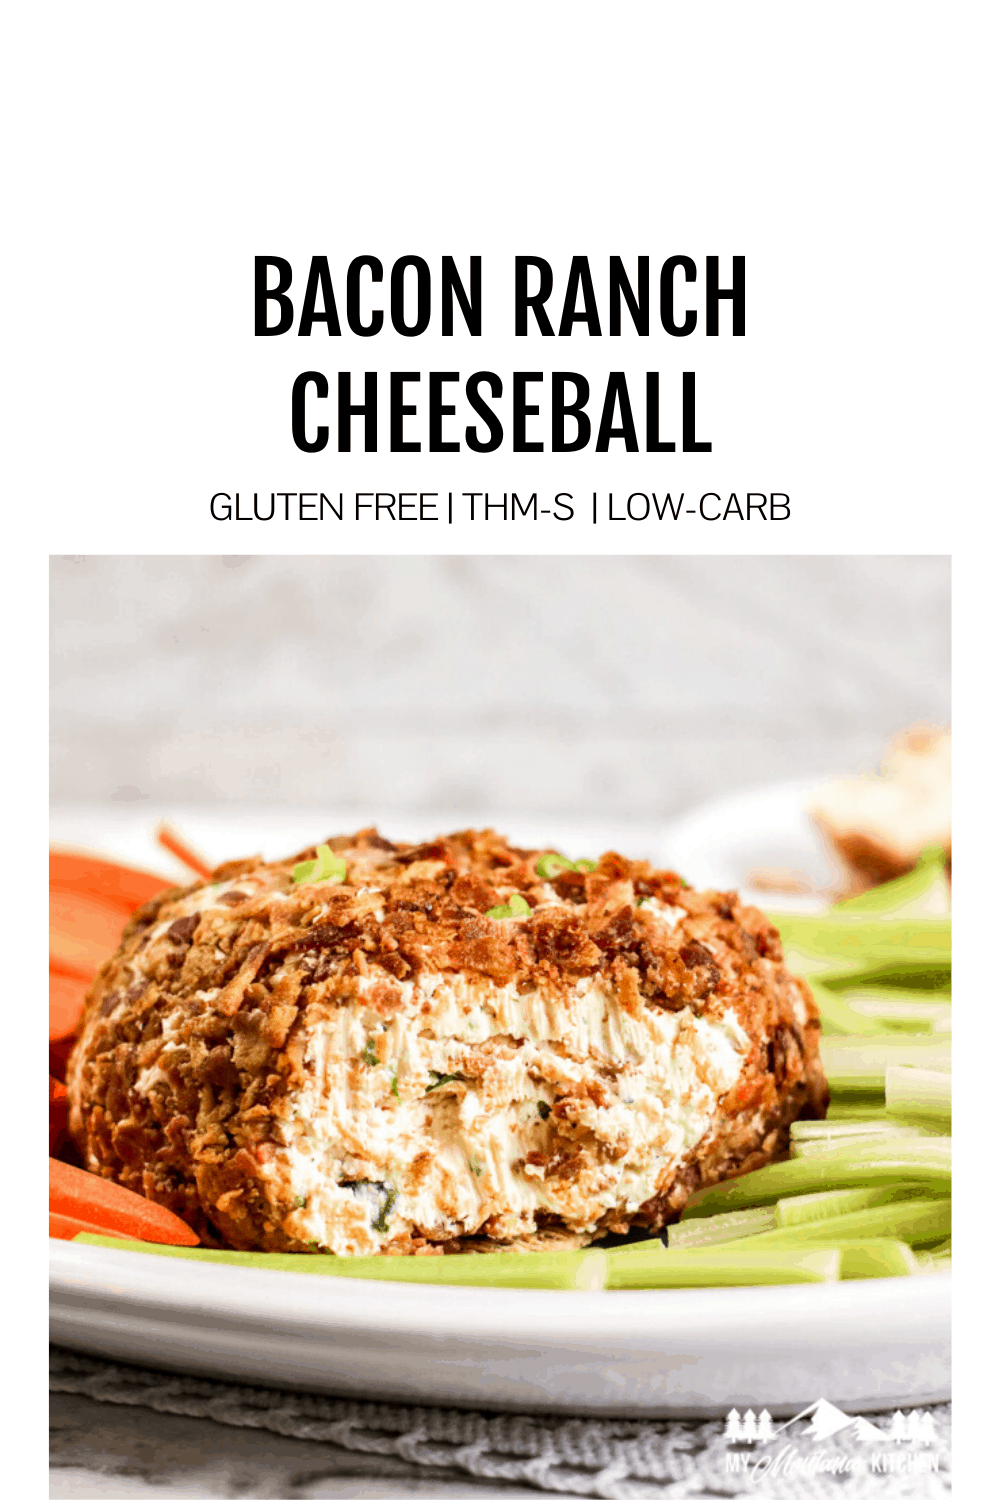 Featured Image for Bacon Ranch Cheeseball